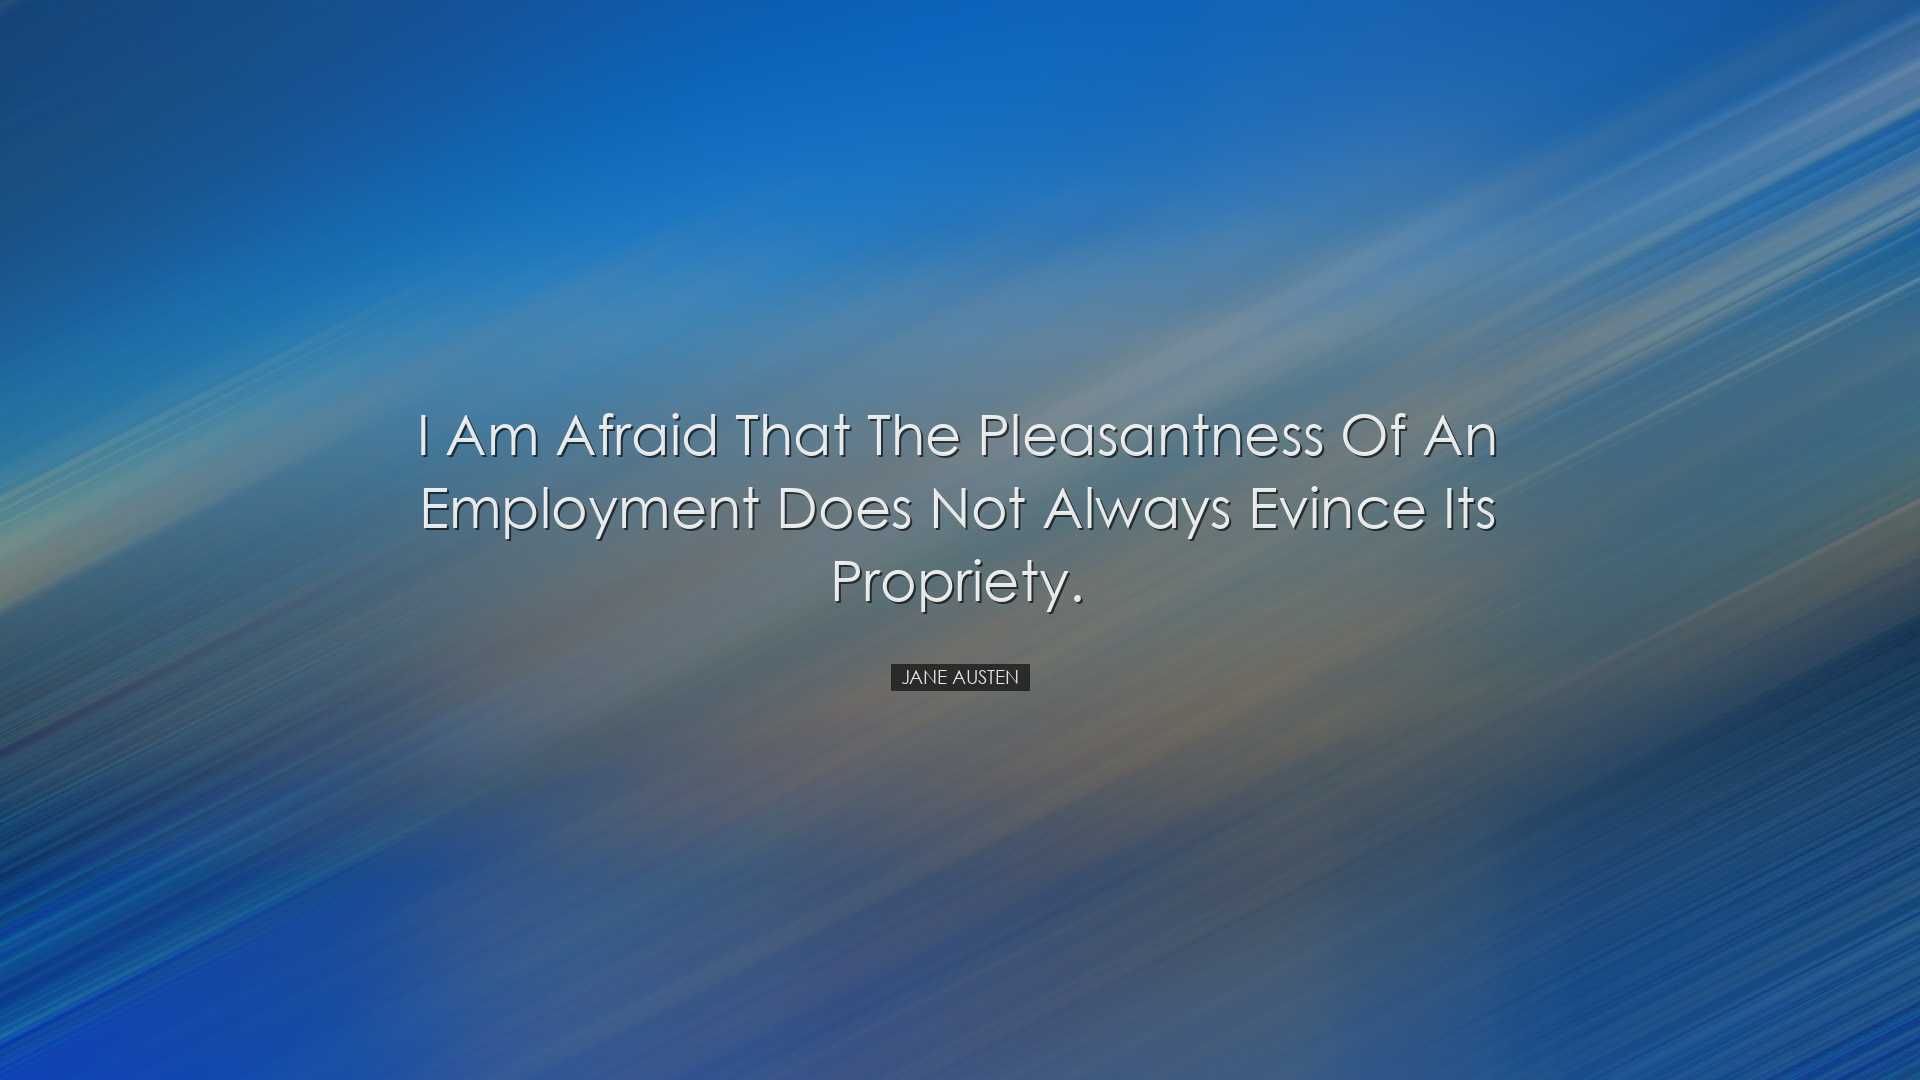 I am afraid that the pleasantness of an employment does not always